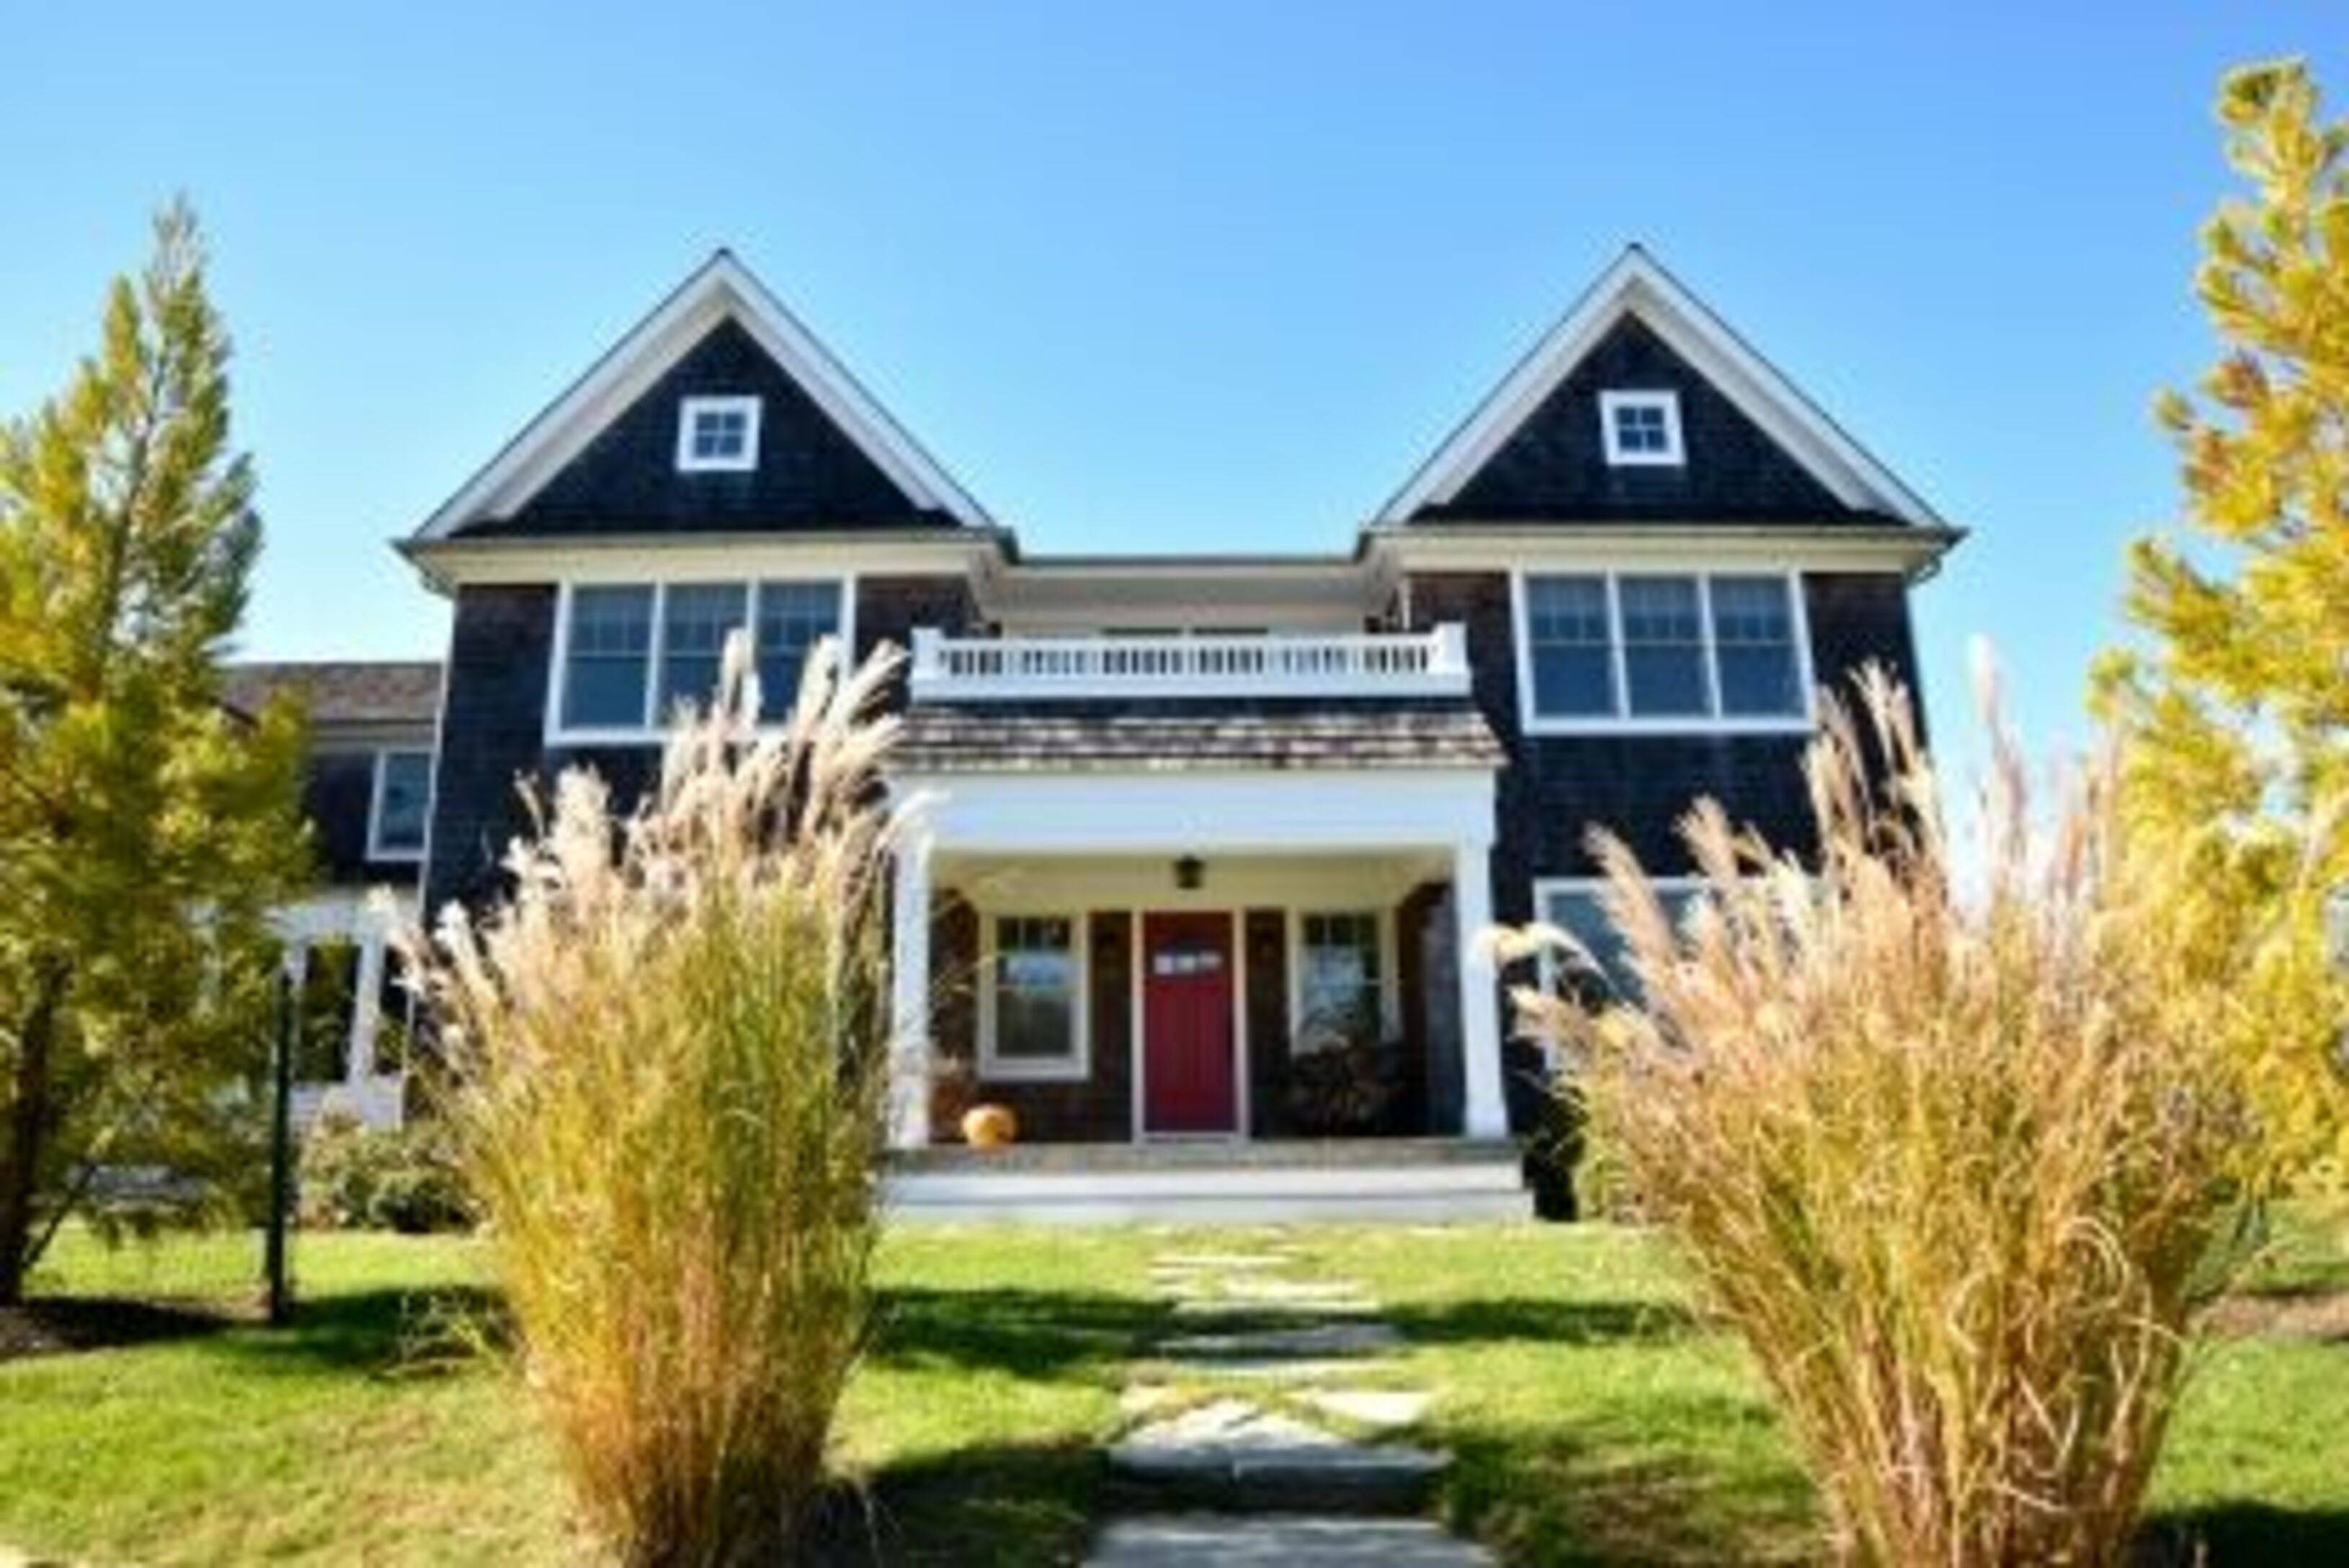 4 Bedroom Montauk Home With Bayview